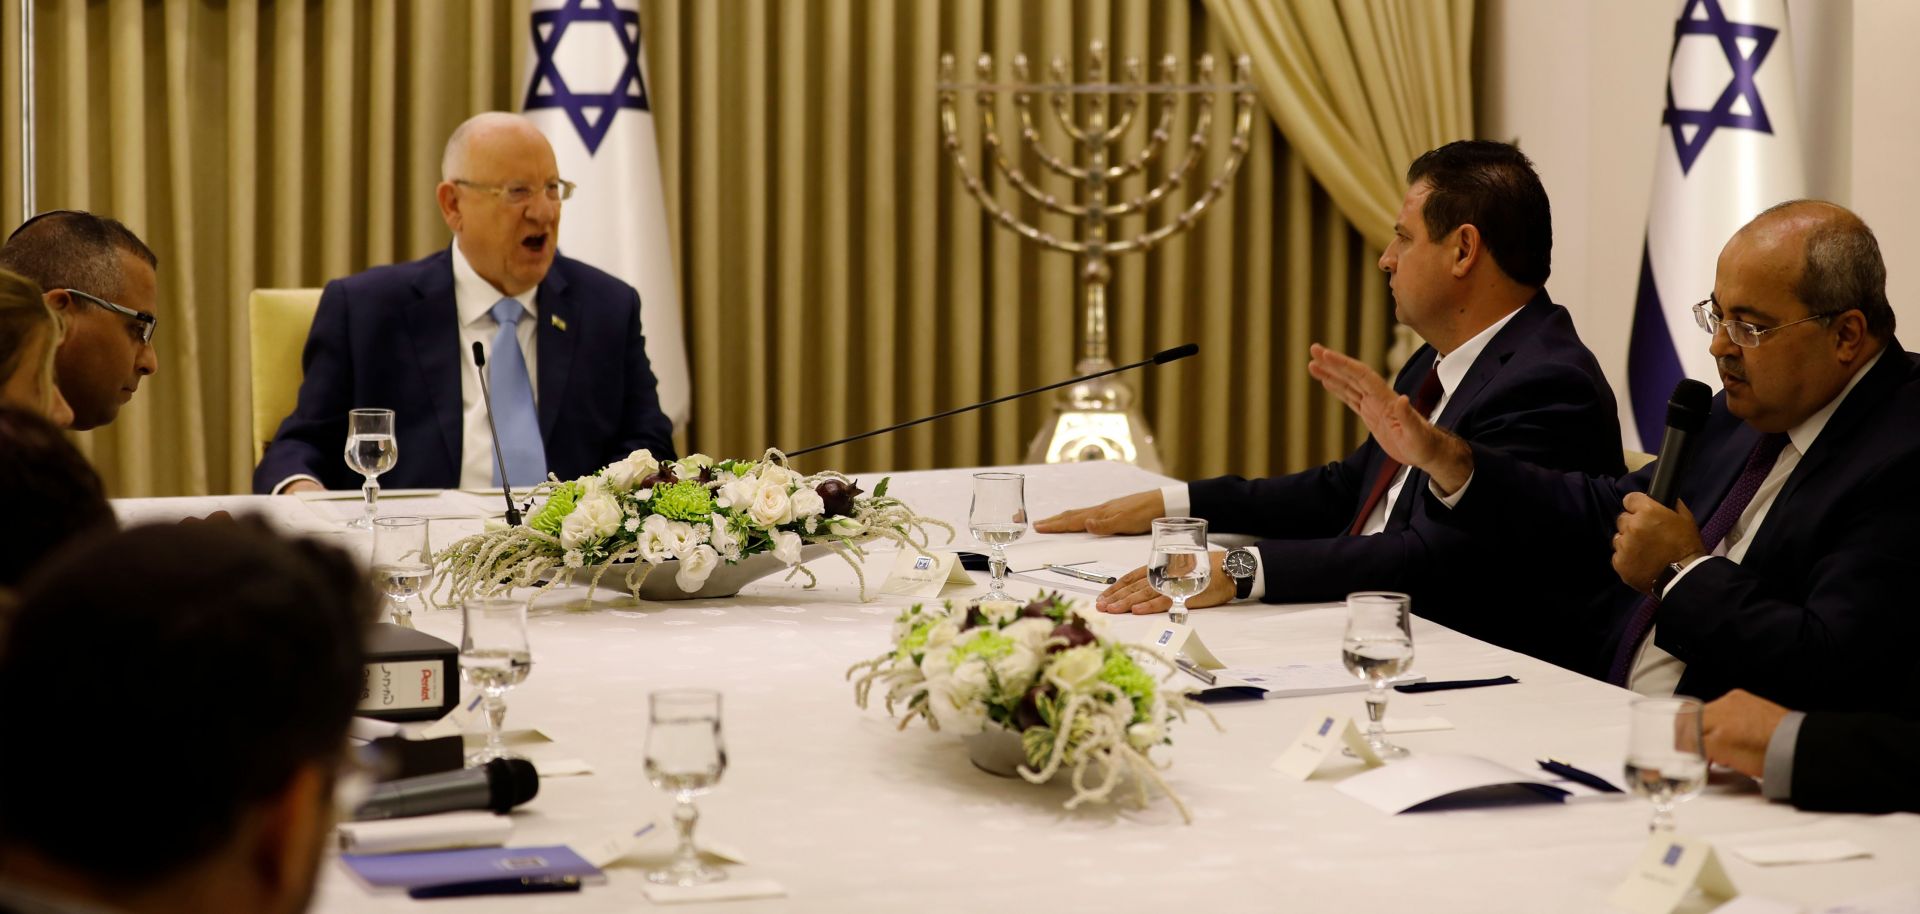 Israeli President Reuven Rivlin meets with members of the Arab-dominated Joint List party in Jerusalem on Sept. 22, 2019.